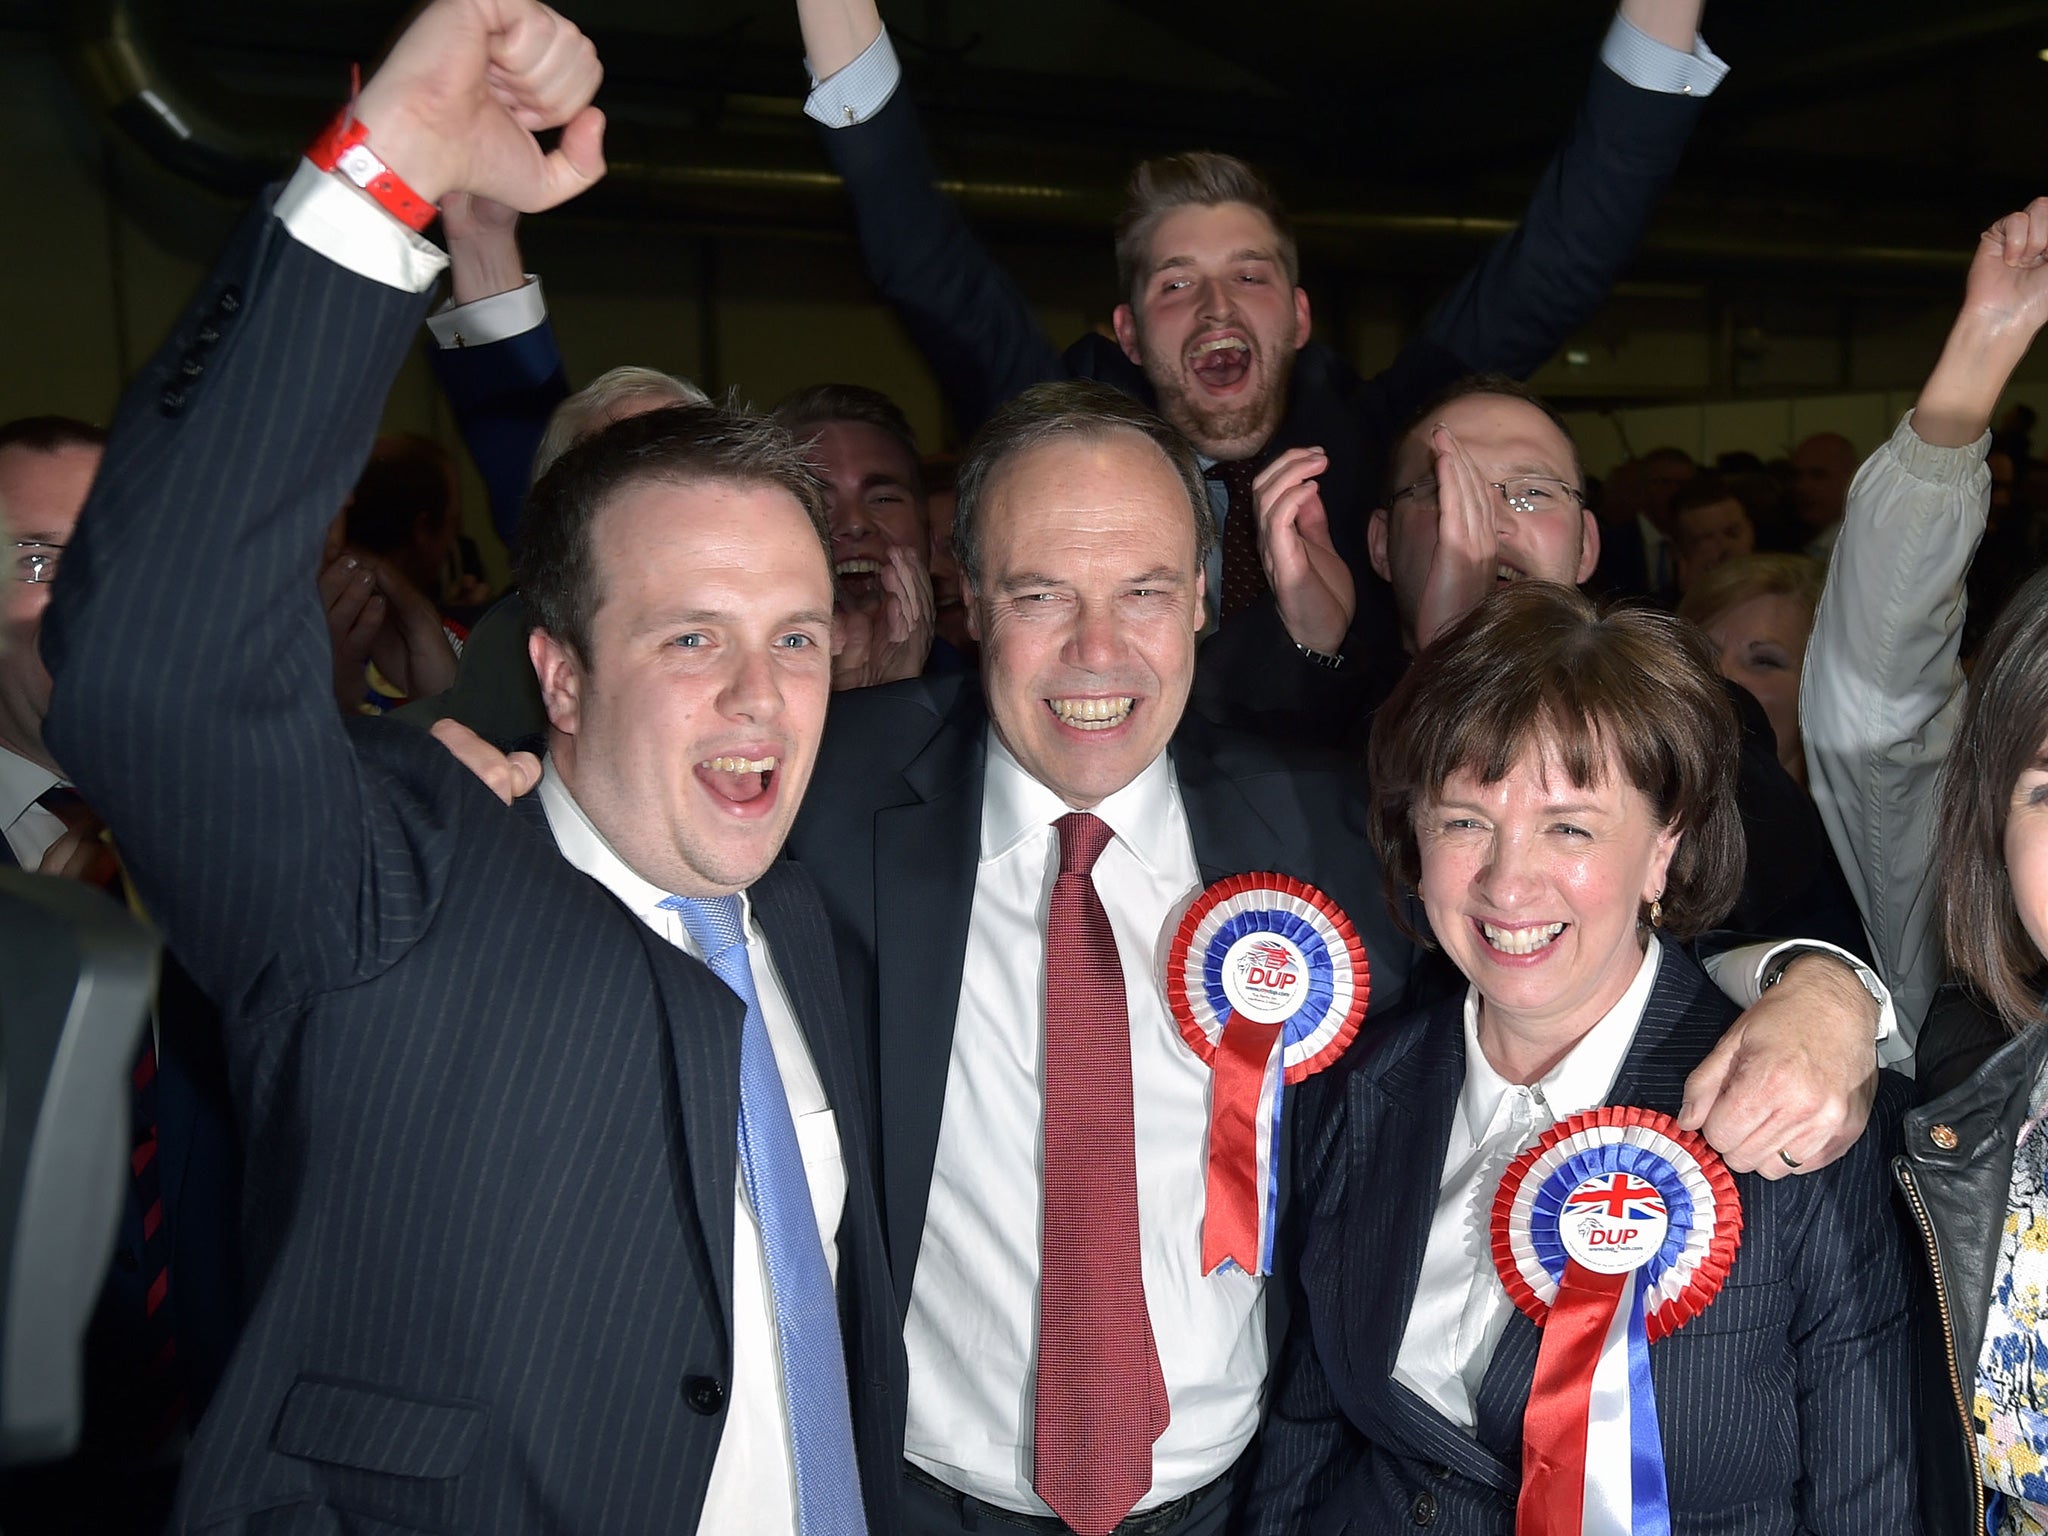 DUP Wesminster leader Nigel Dodds (C) celebrates with his wife Diane Dodds (R) after his win